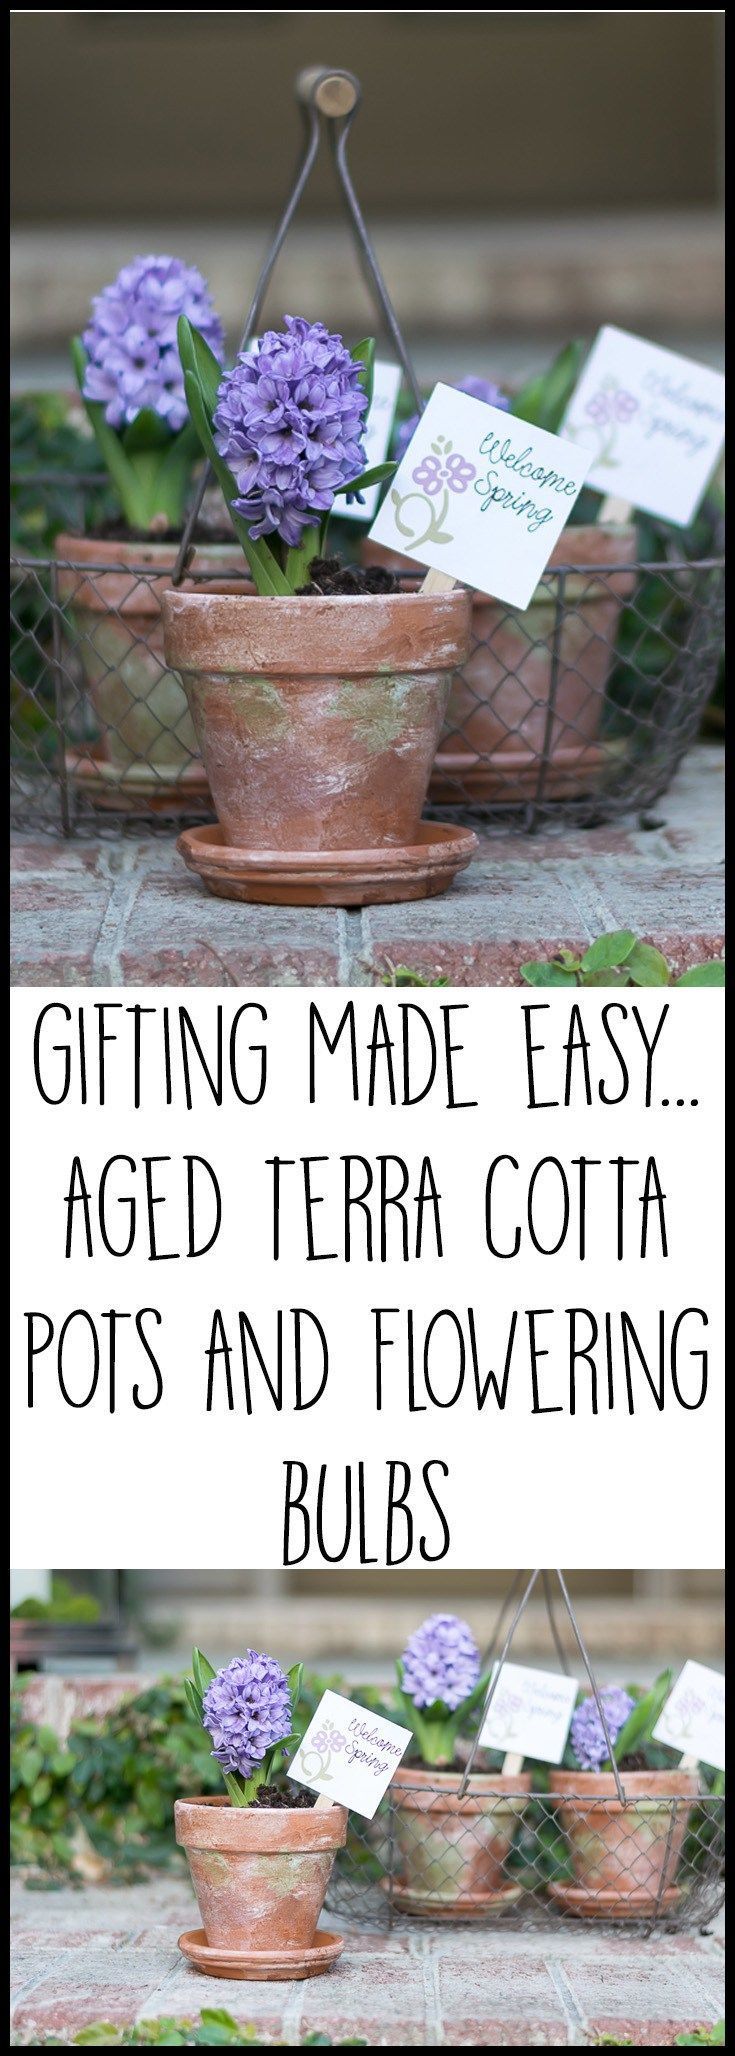 I love the aged and mossy feel that these aged terra cotta pots have. Such an ea...